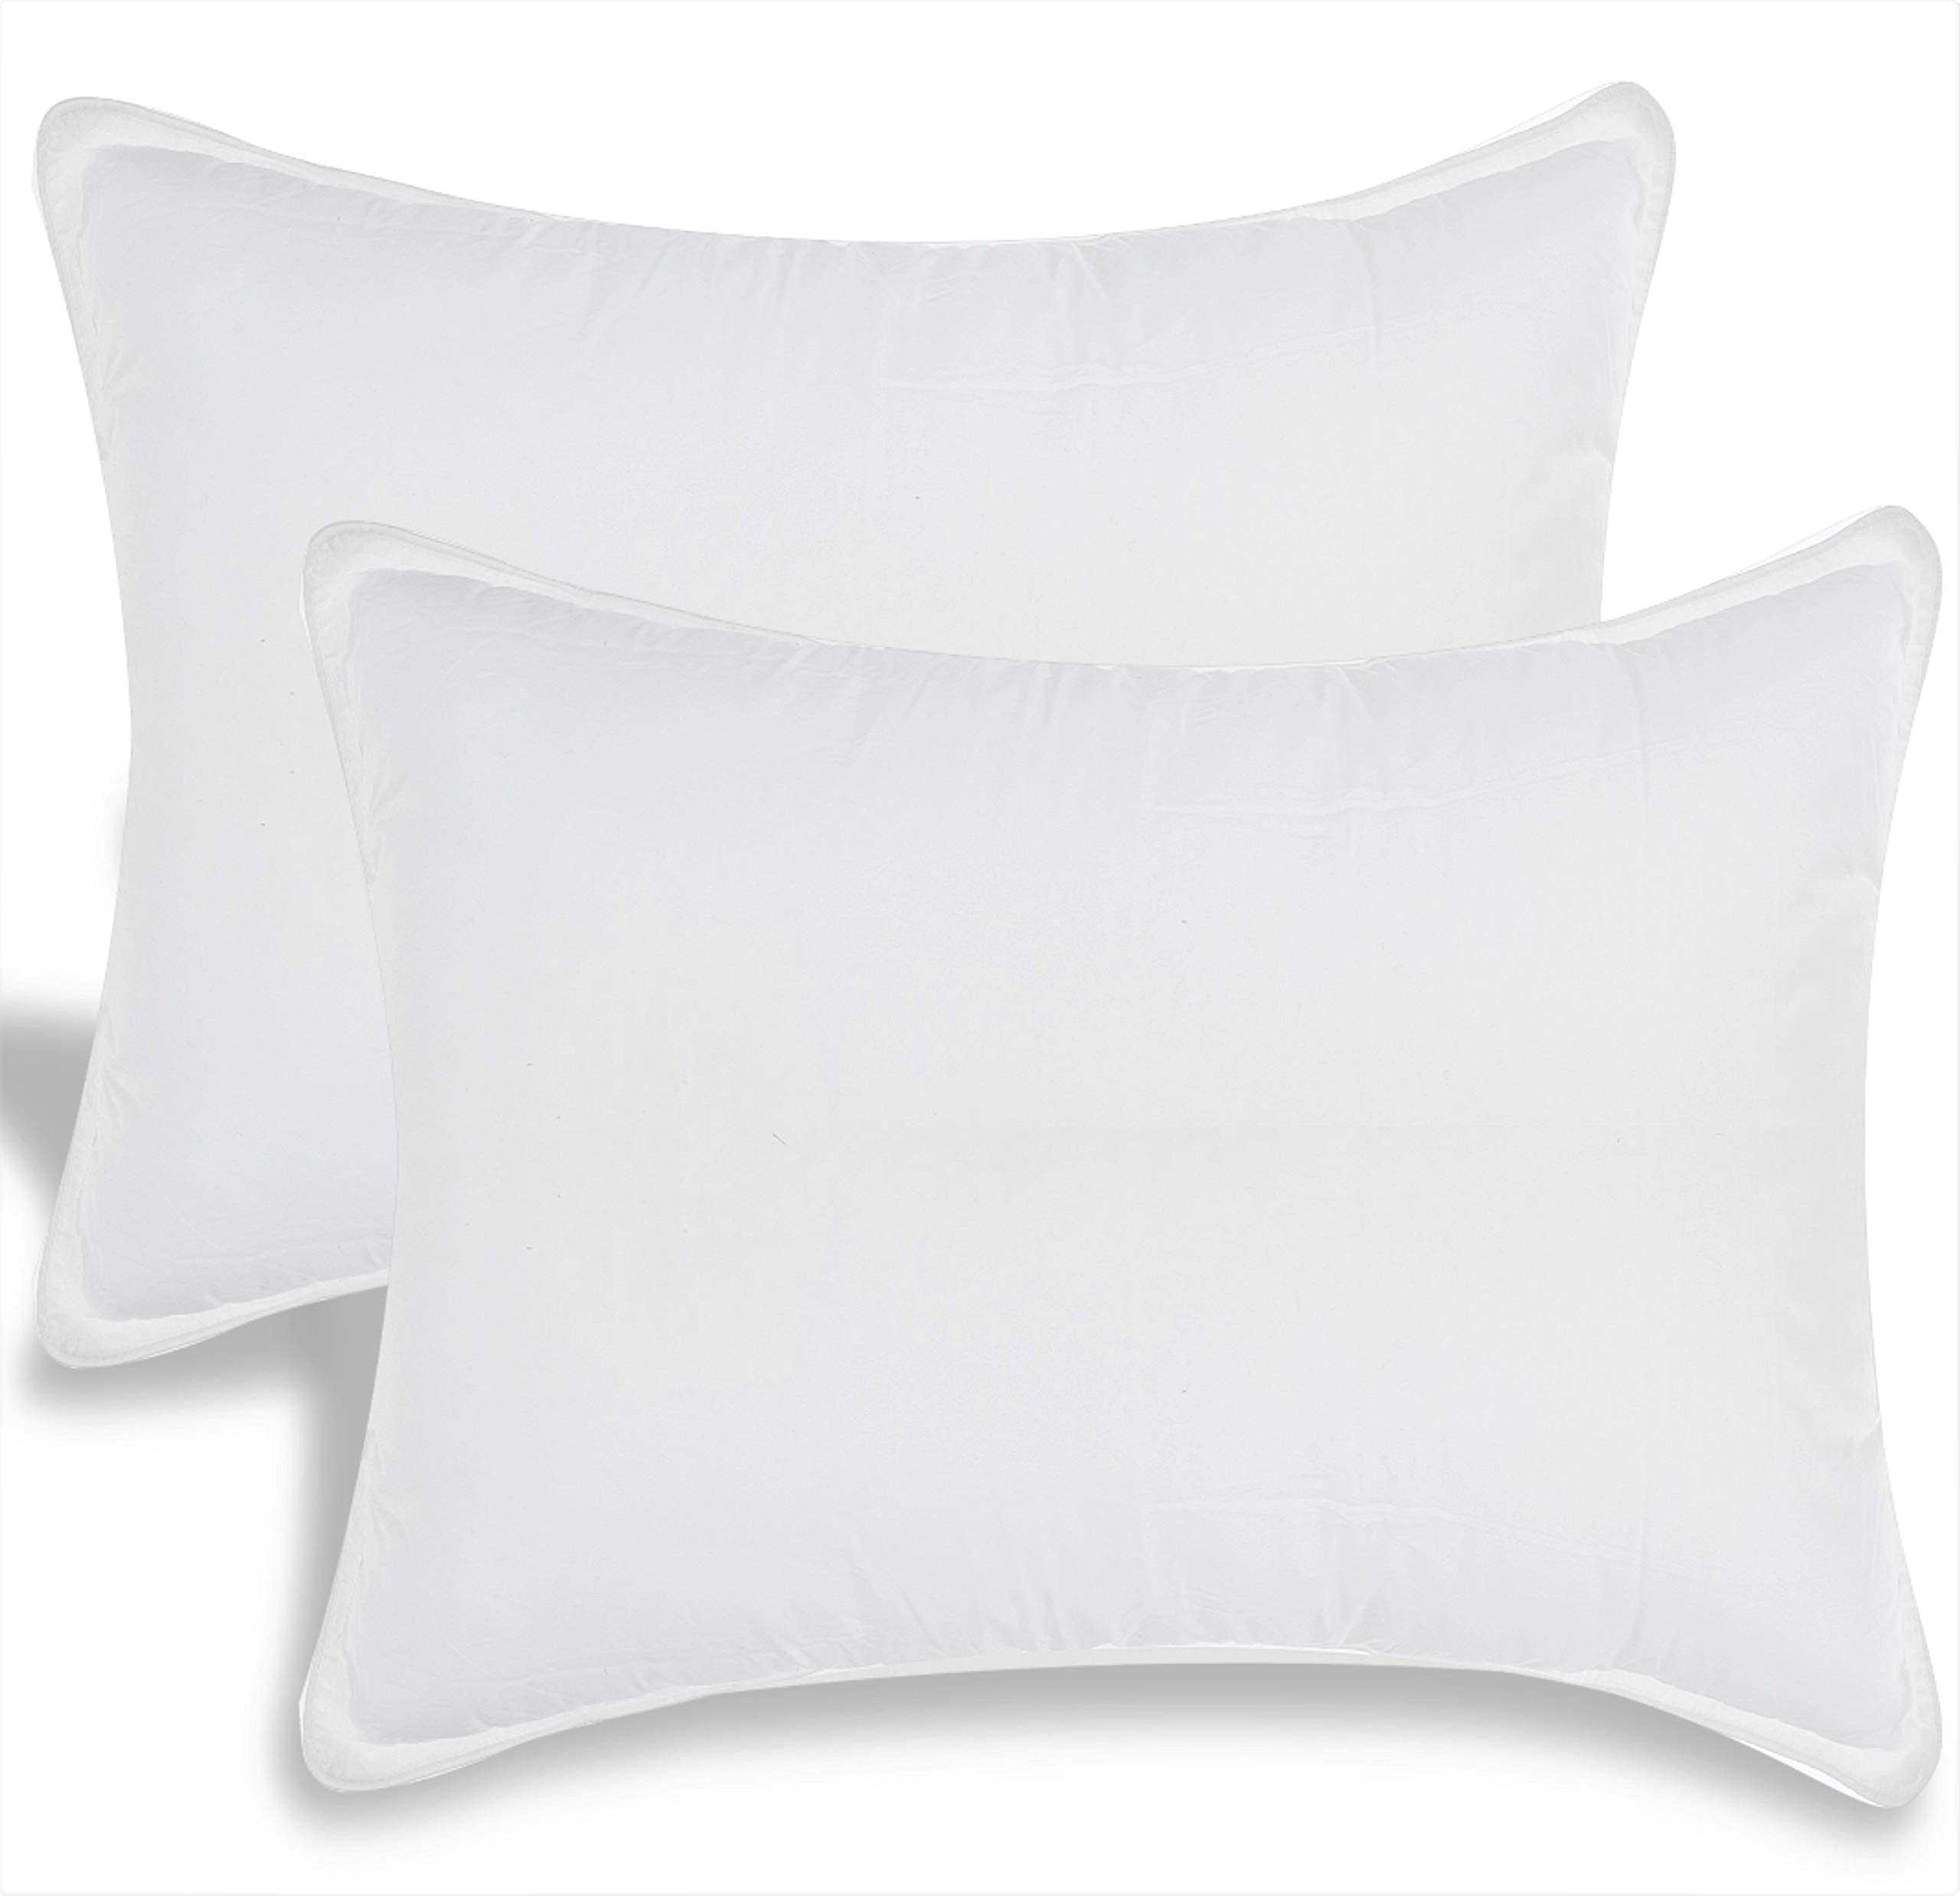 White Classic Bed Pillows for Sleeping | Down Alternative Luxury Hotel Pillow | 2, 6 Pack | Standard, Queen, King Size  - Like New